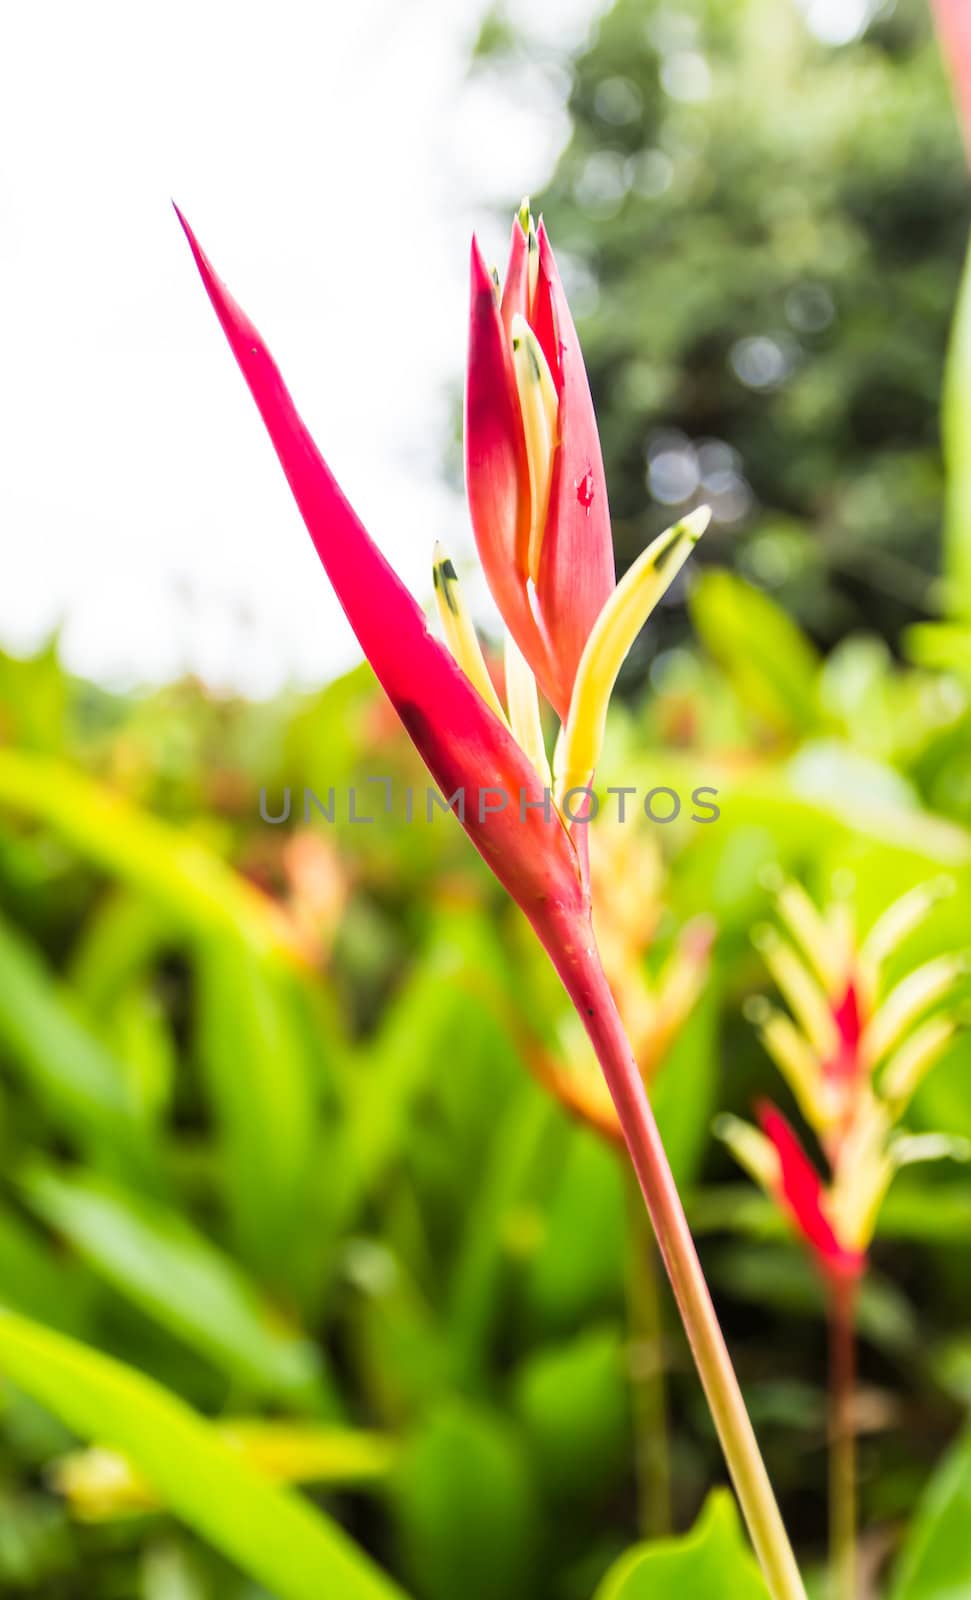 Heliconia flower blossom in garden on flowers at backgroud by photo2life